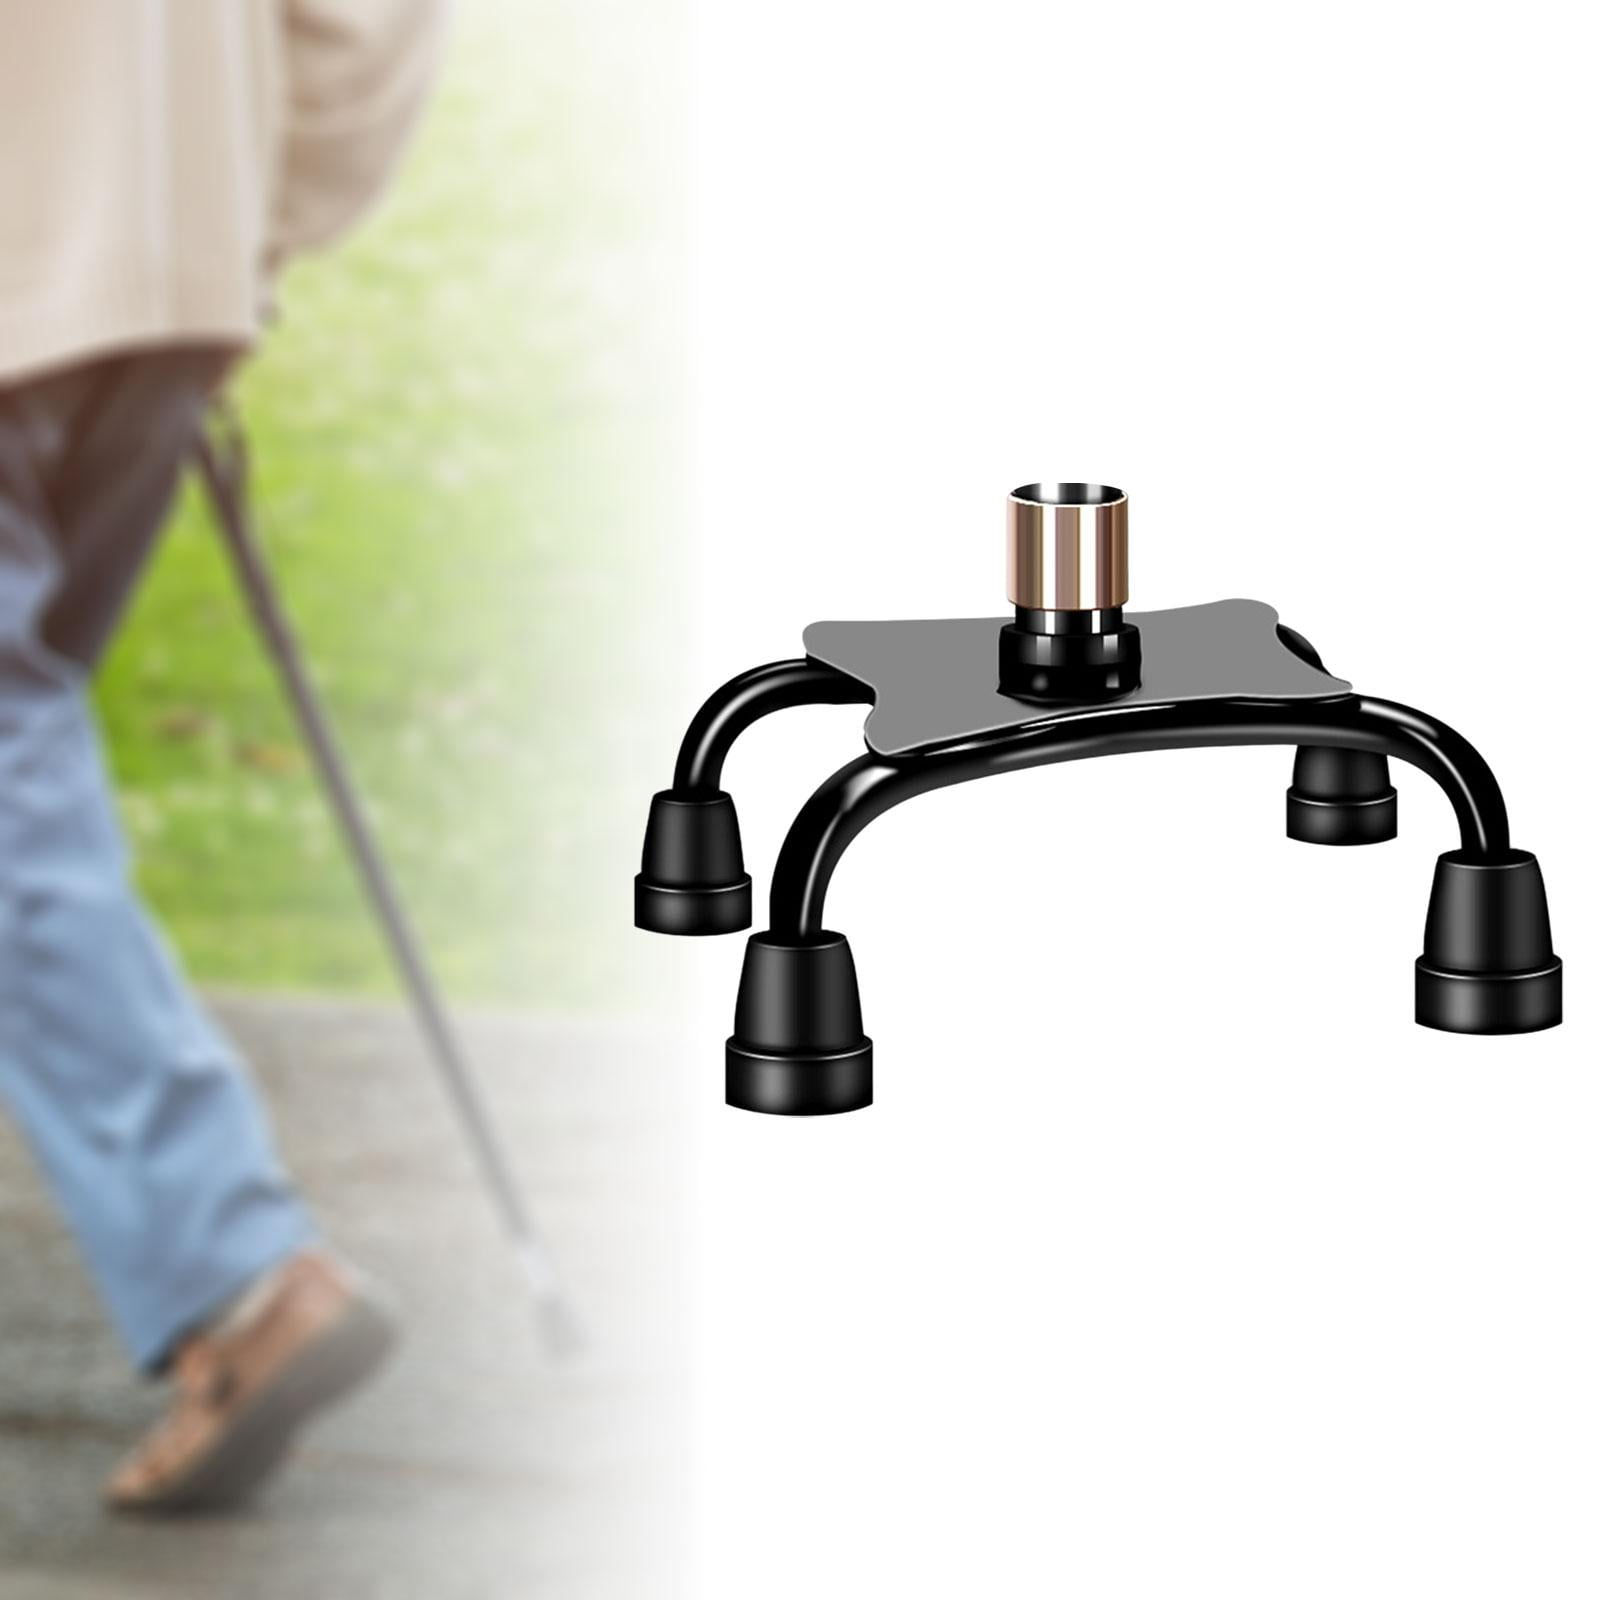 Base Quad Extra Universal Accessory Tip Cane with rod walking Stability Cane 4 Pads Tips Rubber Feet Cane for Support Foot Cane Large Ferrules